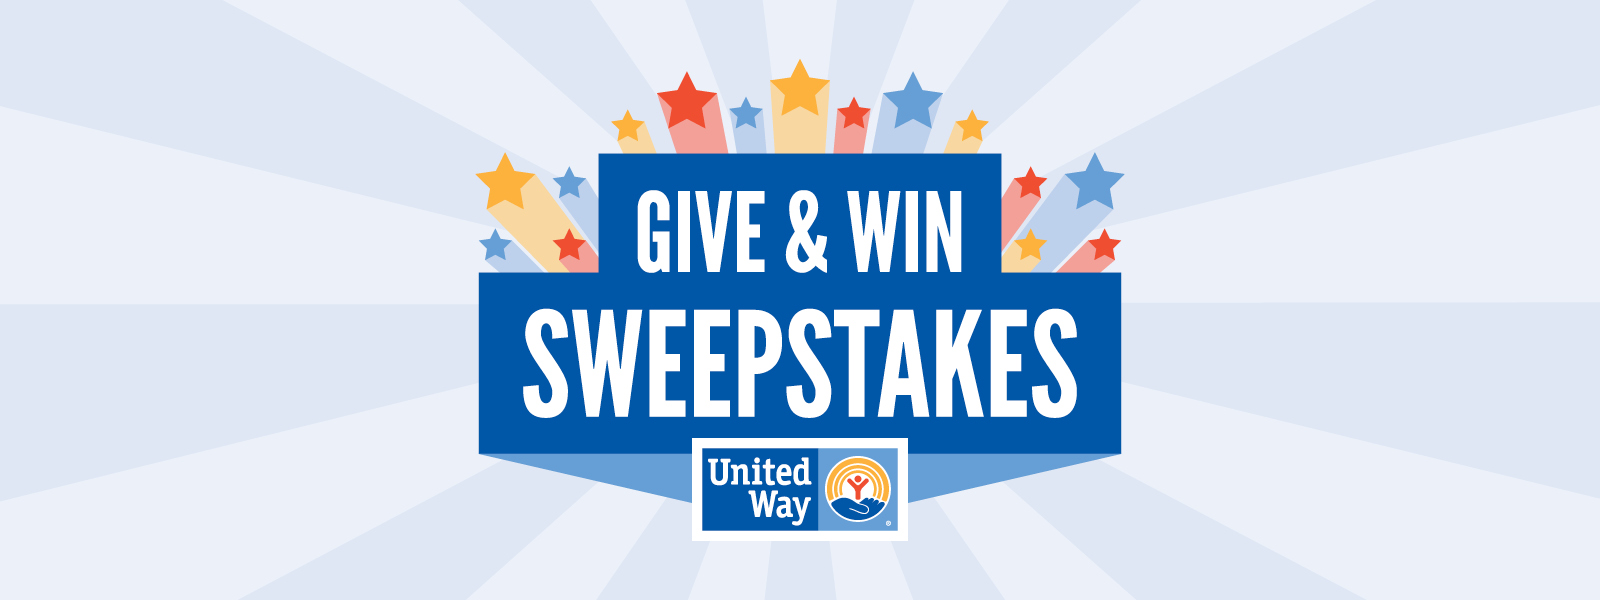 image with starts and words Give & Win Sweepstakes